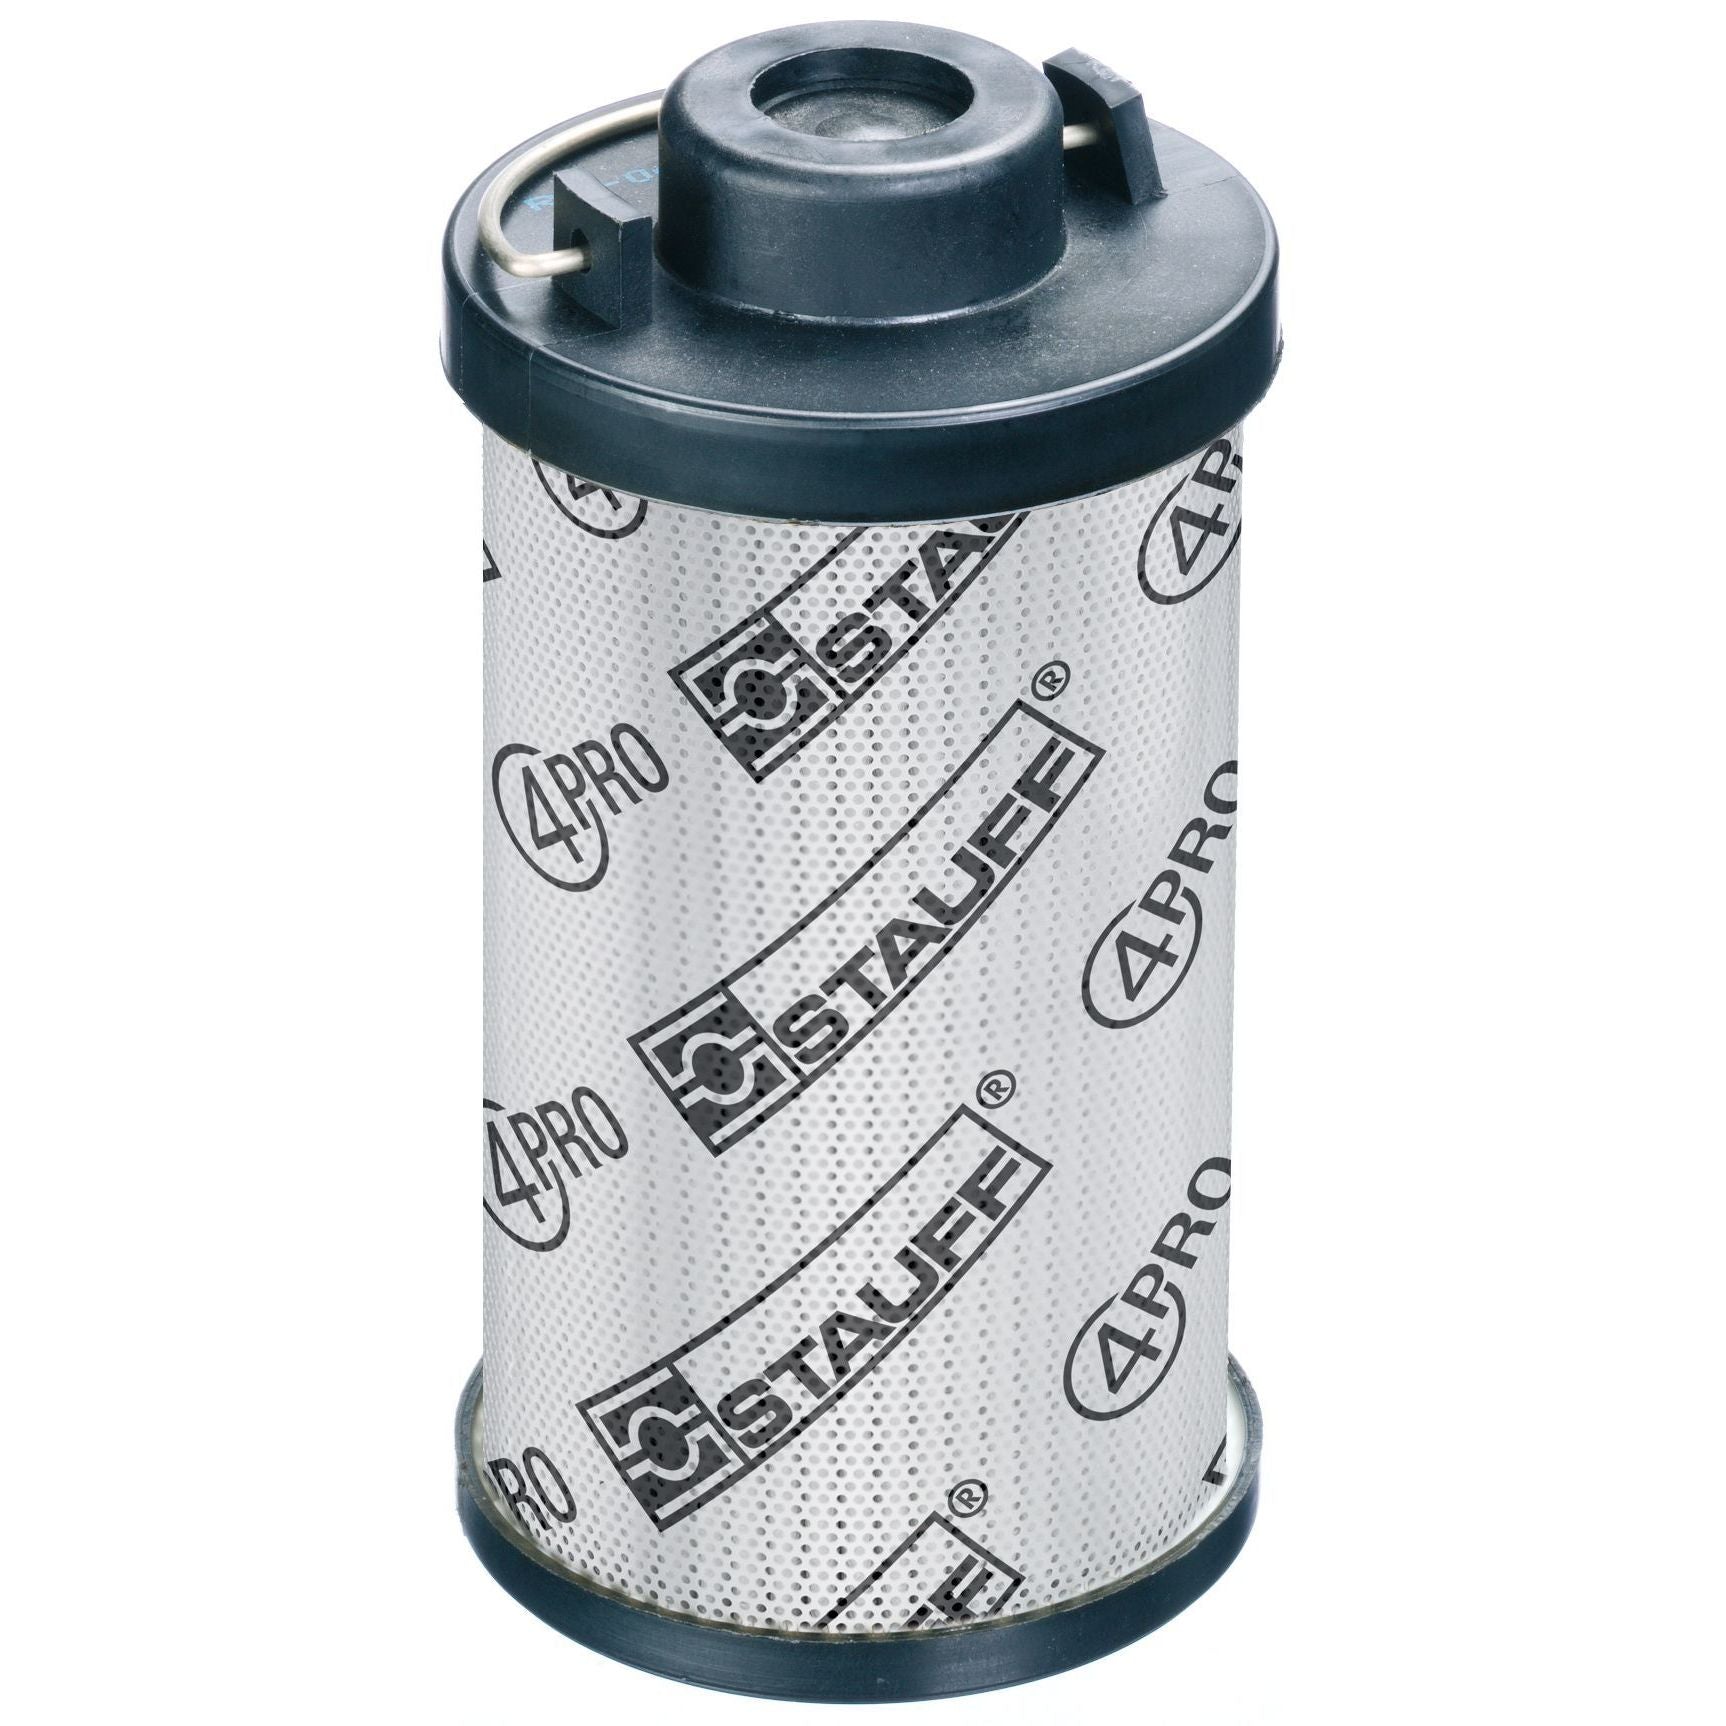 RE-300-G-10-B-B3/4 : Stauff RF-300 Series Filter Element, 10 Micron, Synthetic, 363psi Collapse Differential, Buna